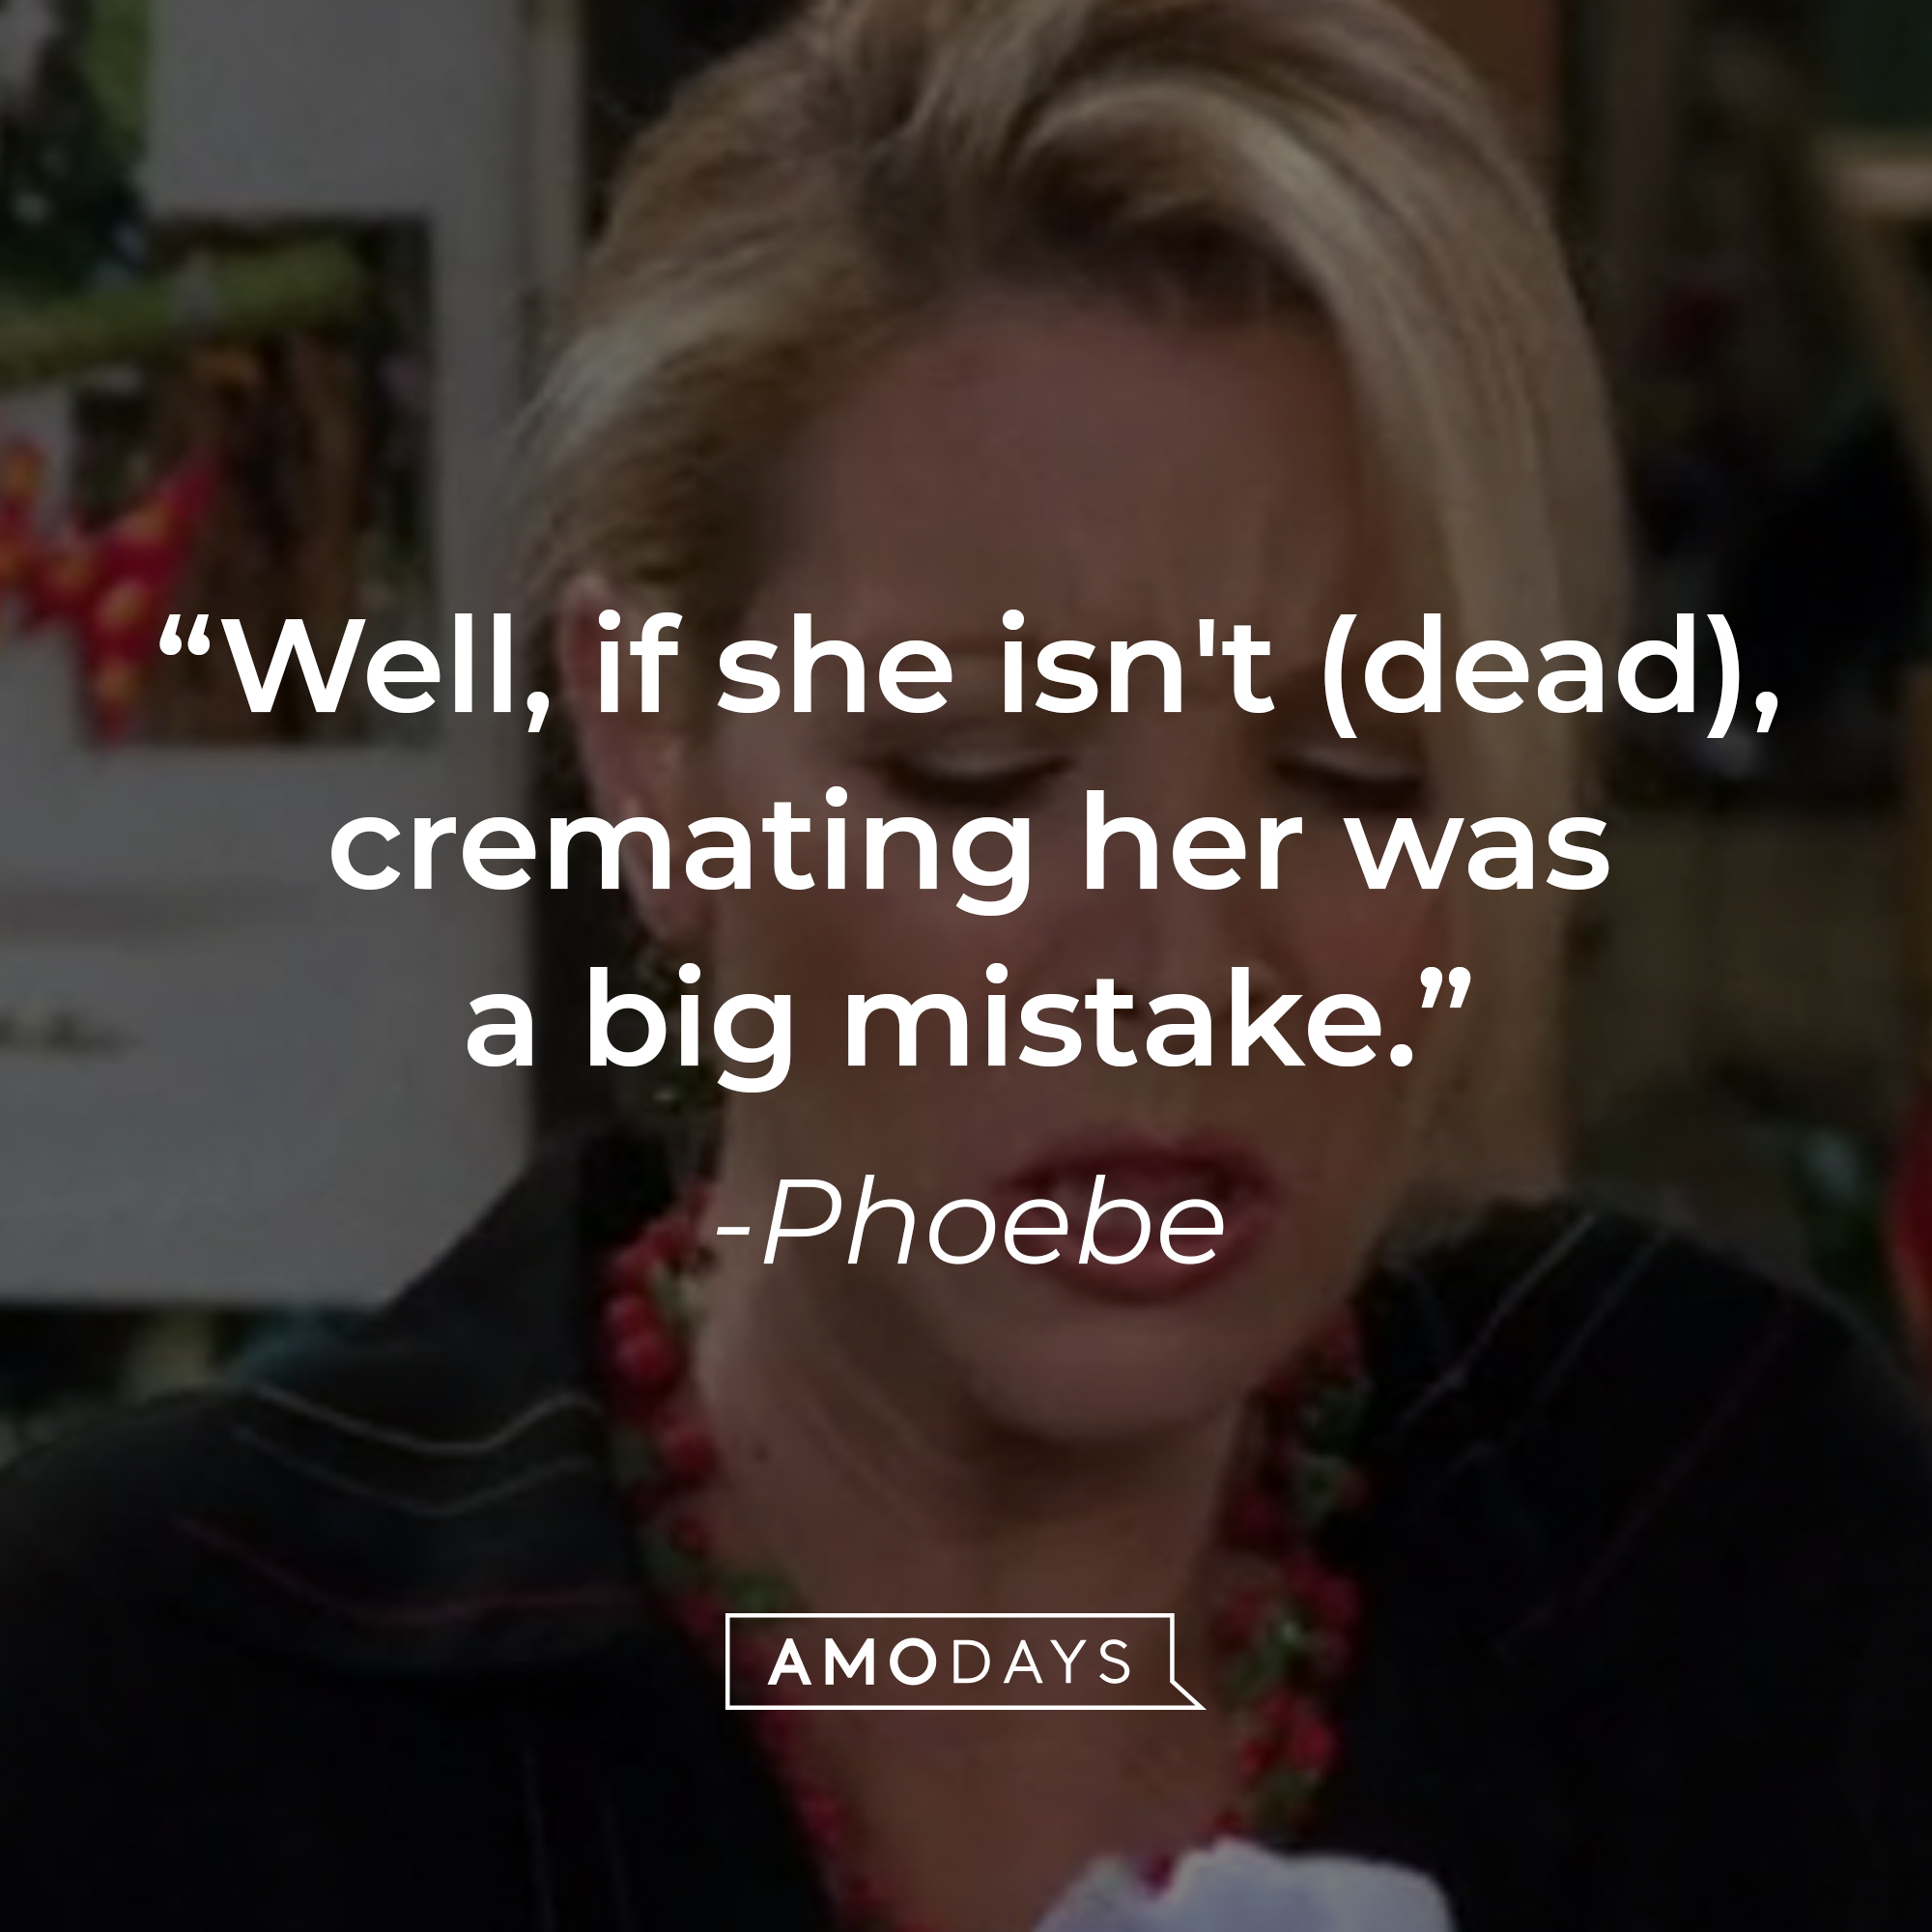 Phoebe's quote: "Well, if she isn't (dead), cremating her was a big mistake." | Source: Facebook.com/friends.tv